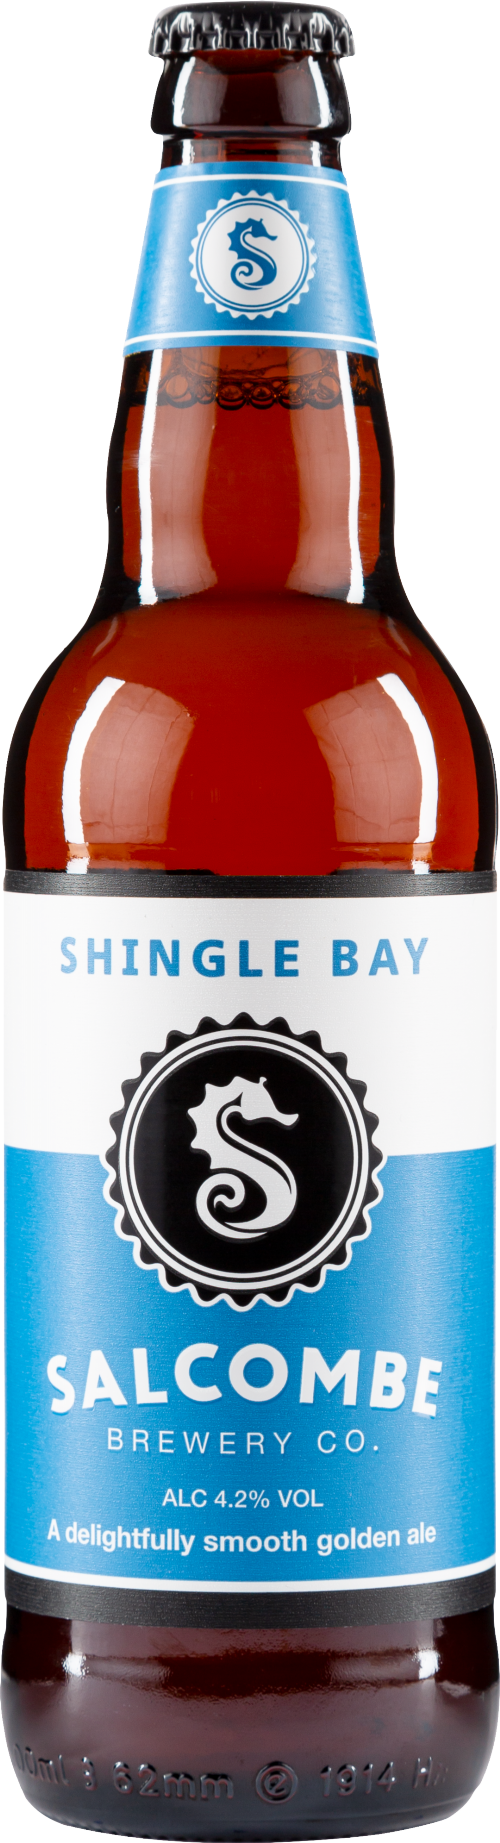 SALCOMBE BREWERY CO. Shingle Bay Ale 4.2% ABV 50cl